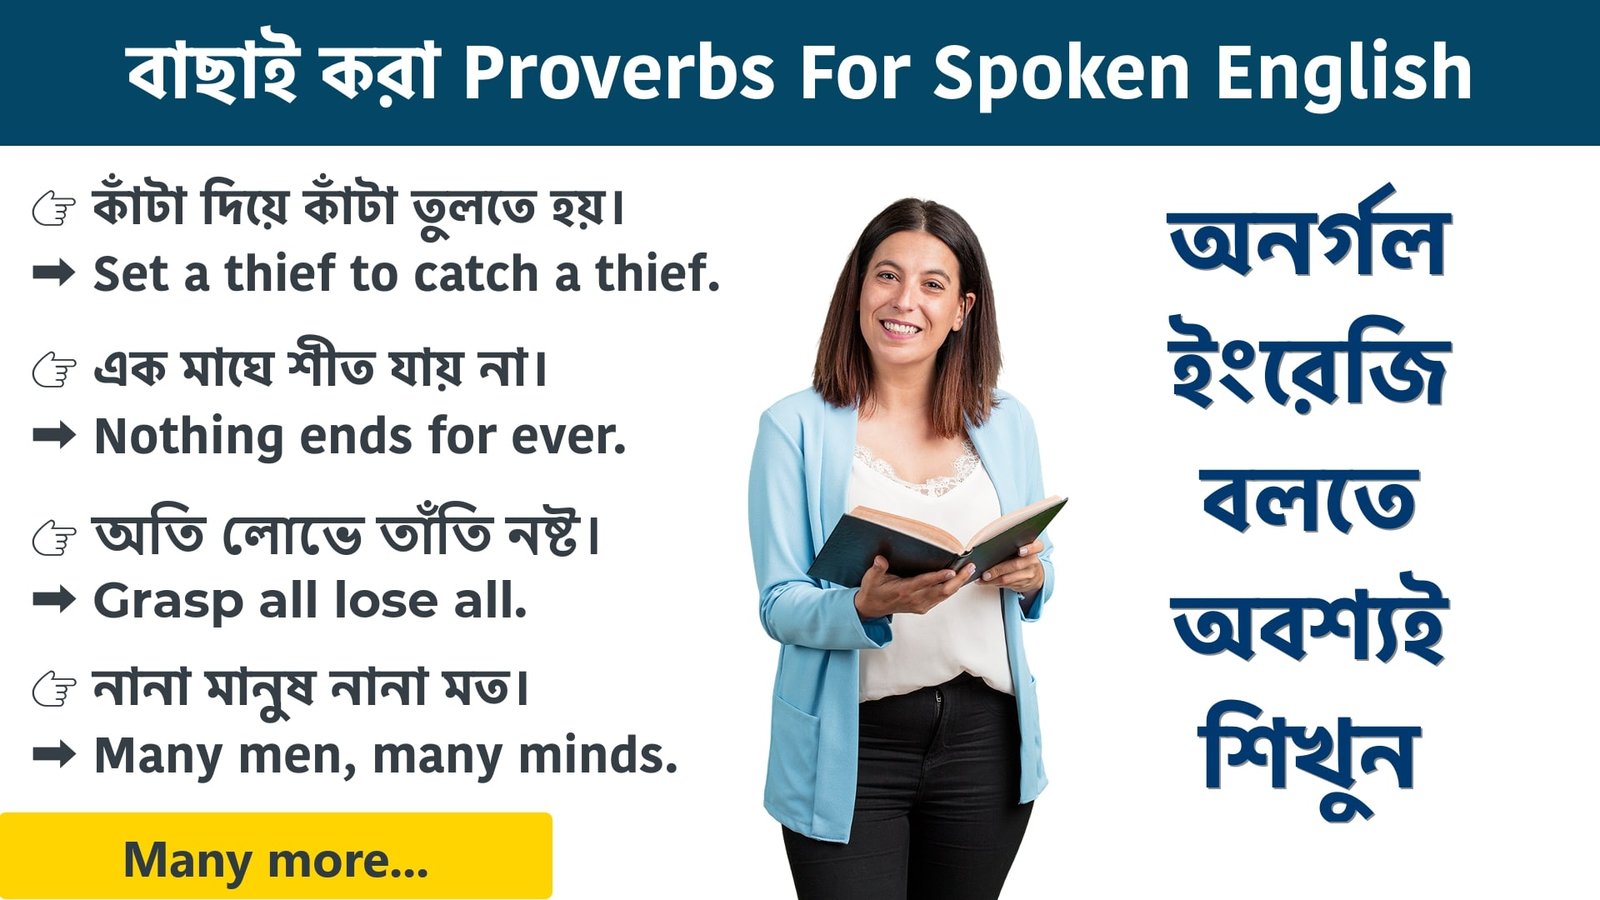 Proverbs with Bengali meaning - Proverbs